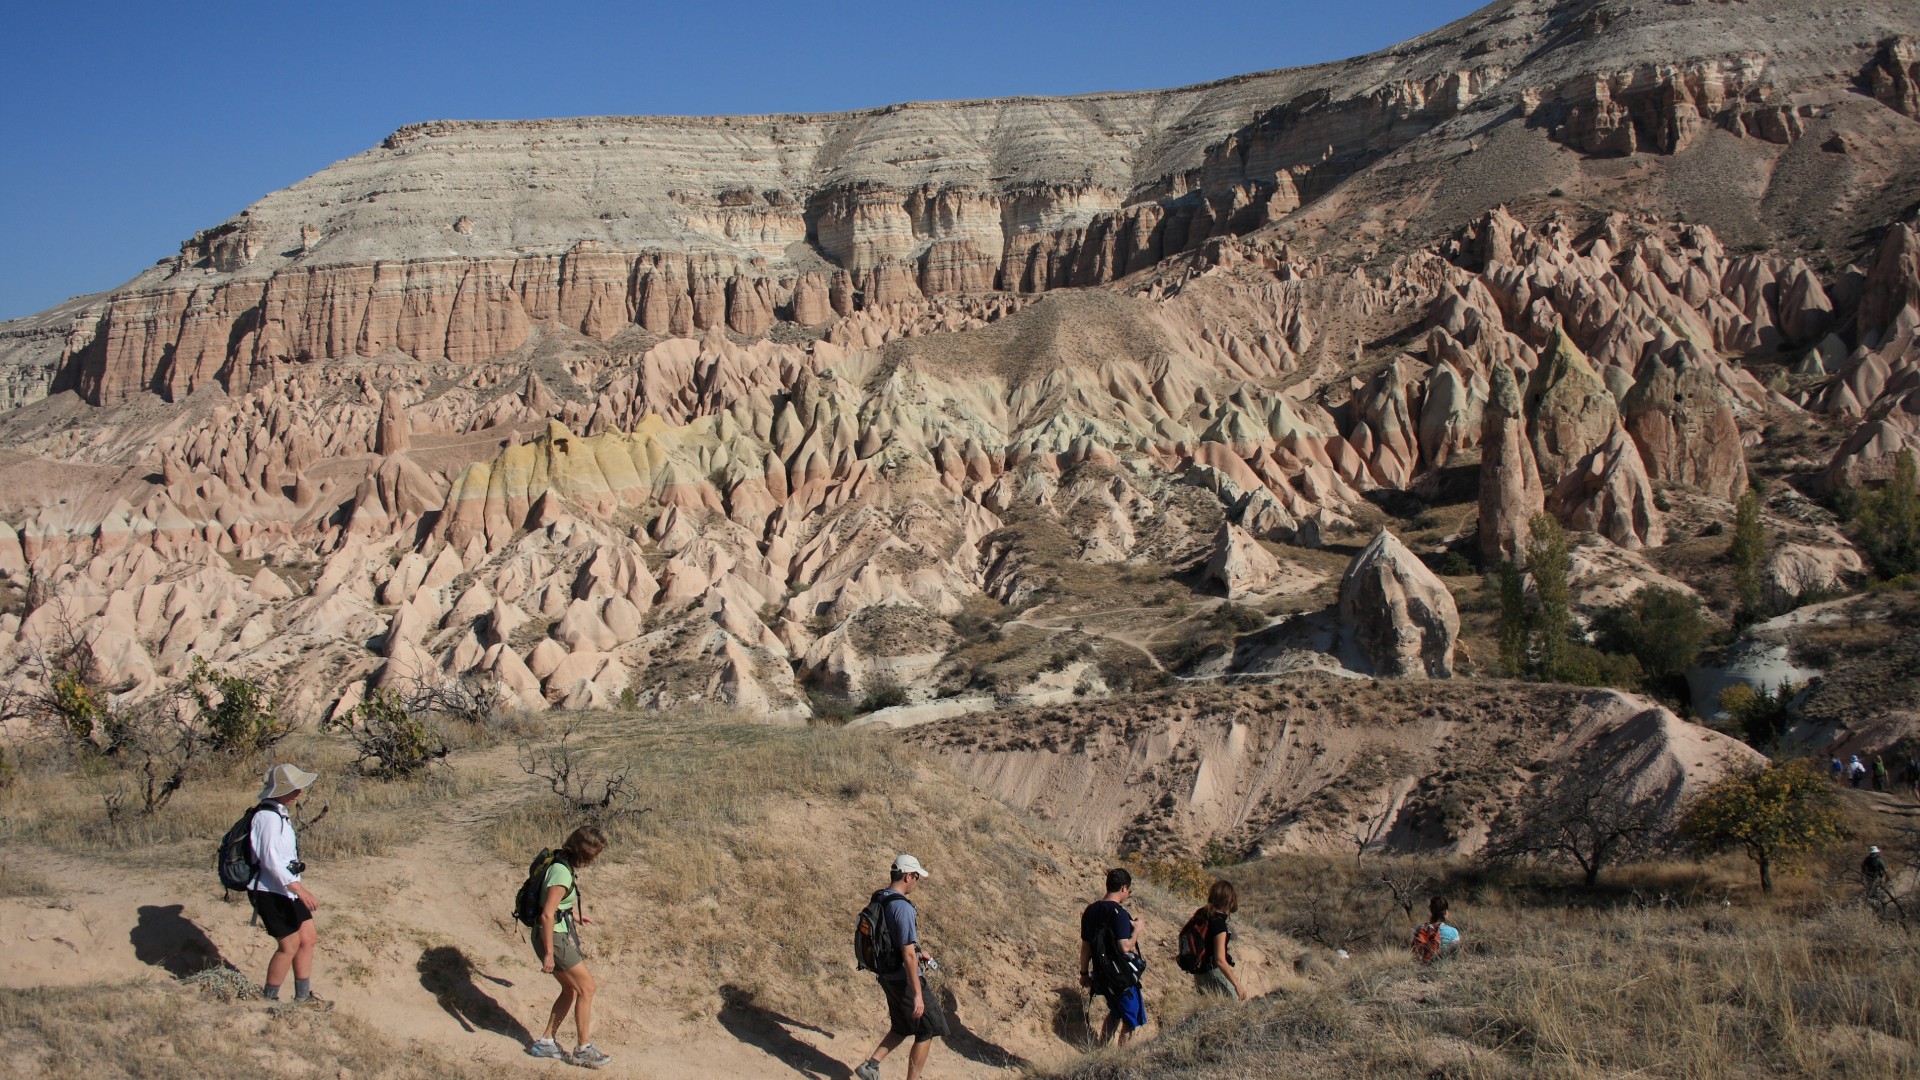 Hikers in the rugged, desert, landscape of Turkey